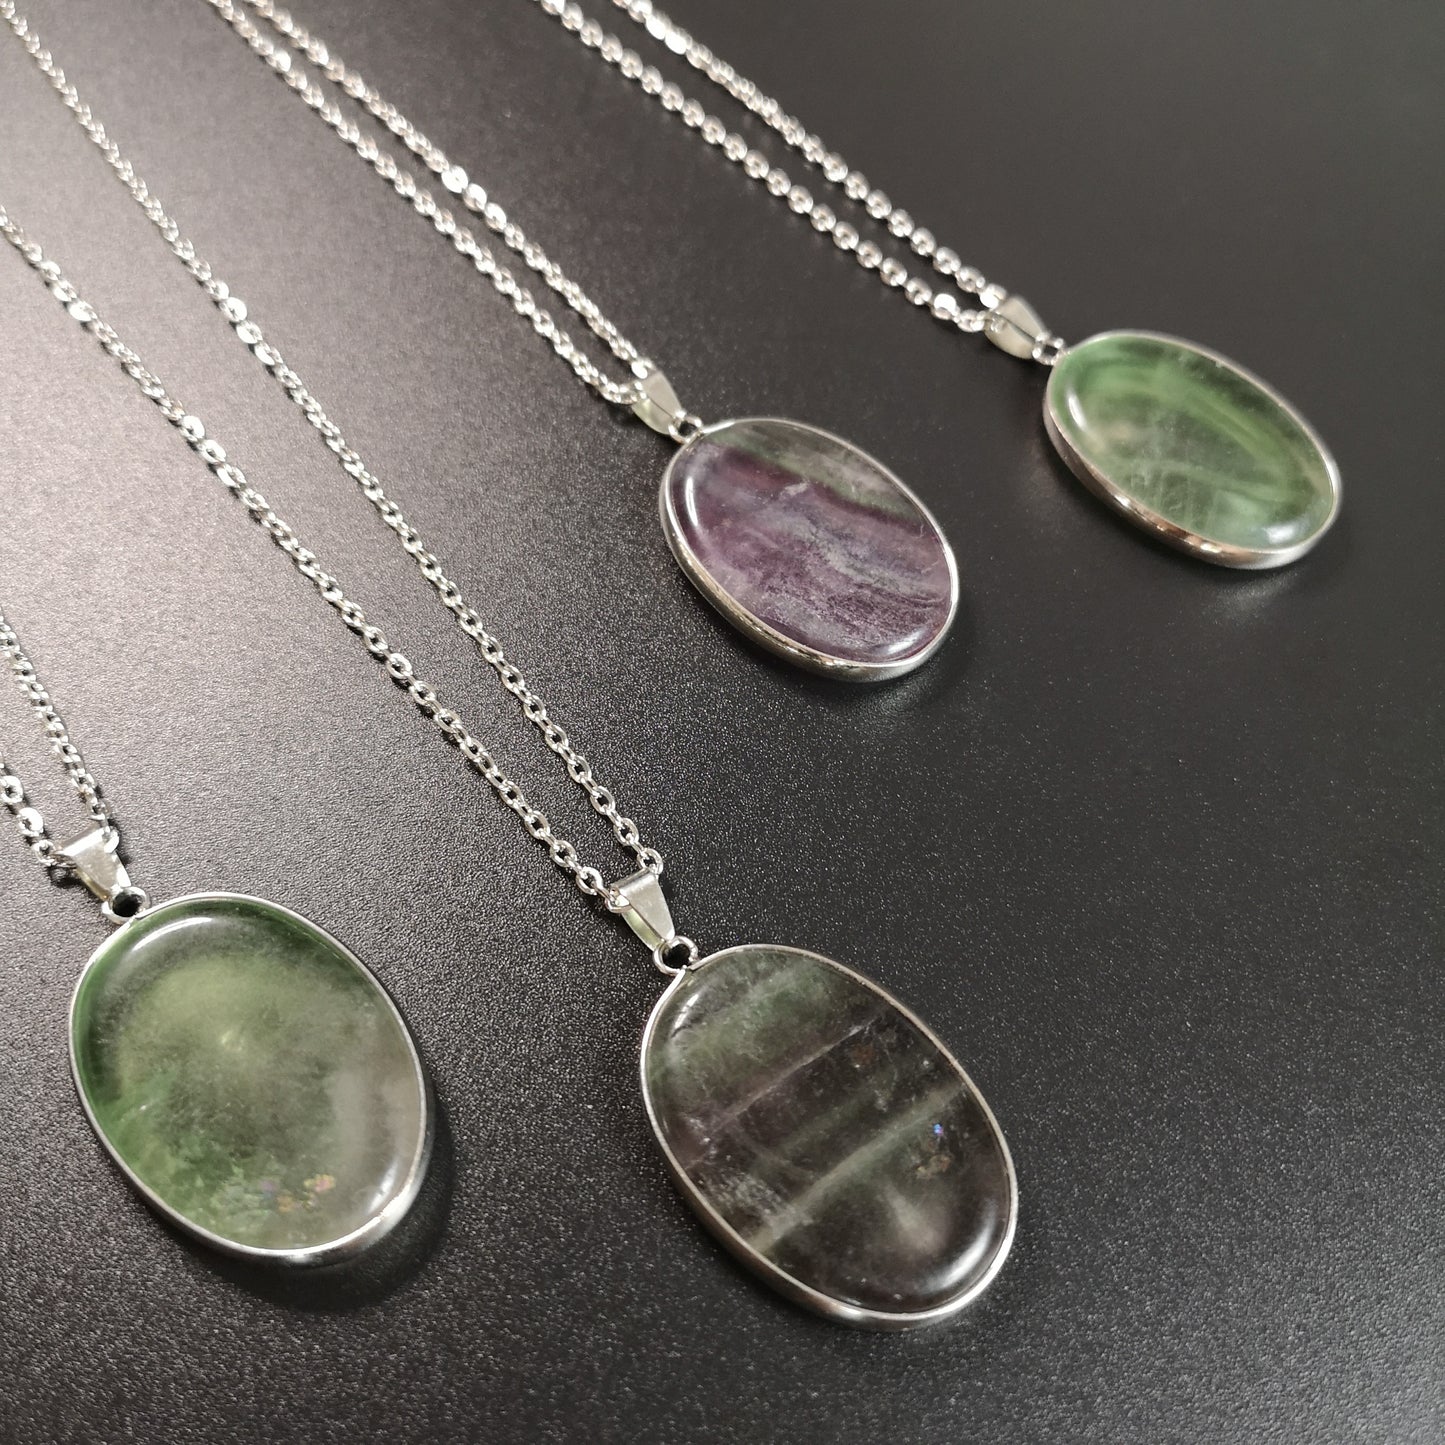 Big fluorite gemstone pendant necklace - The French Witch shop